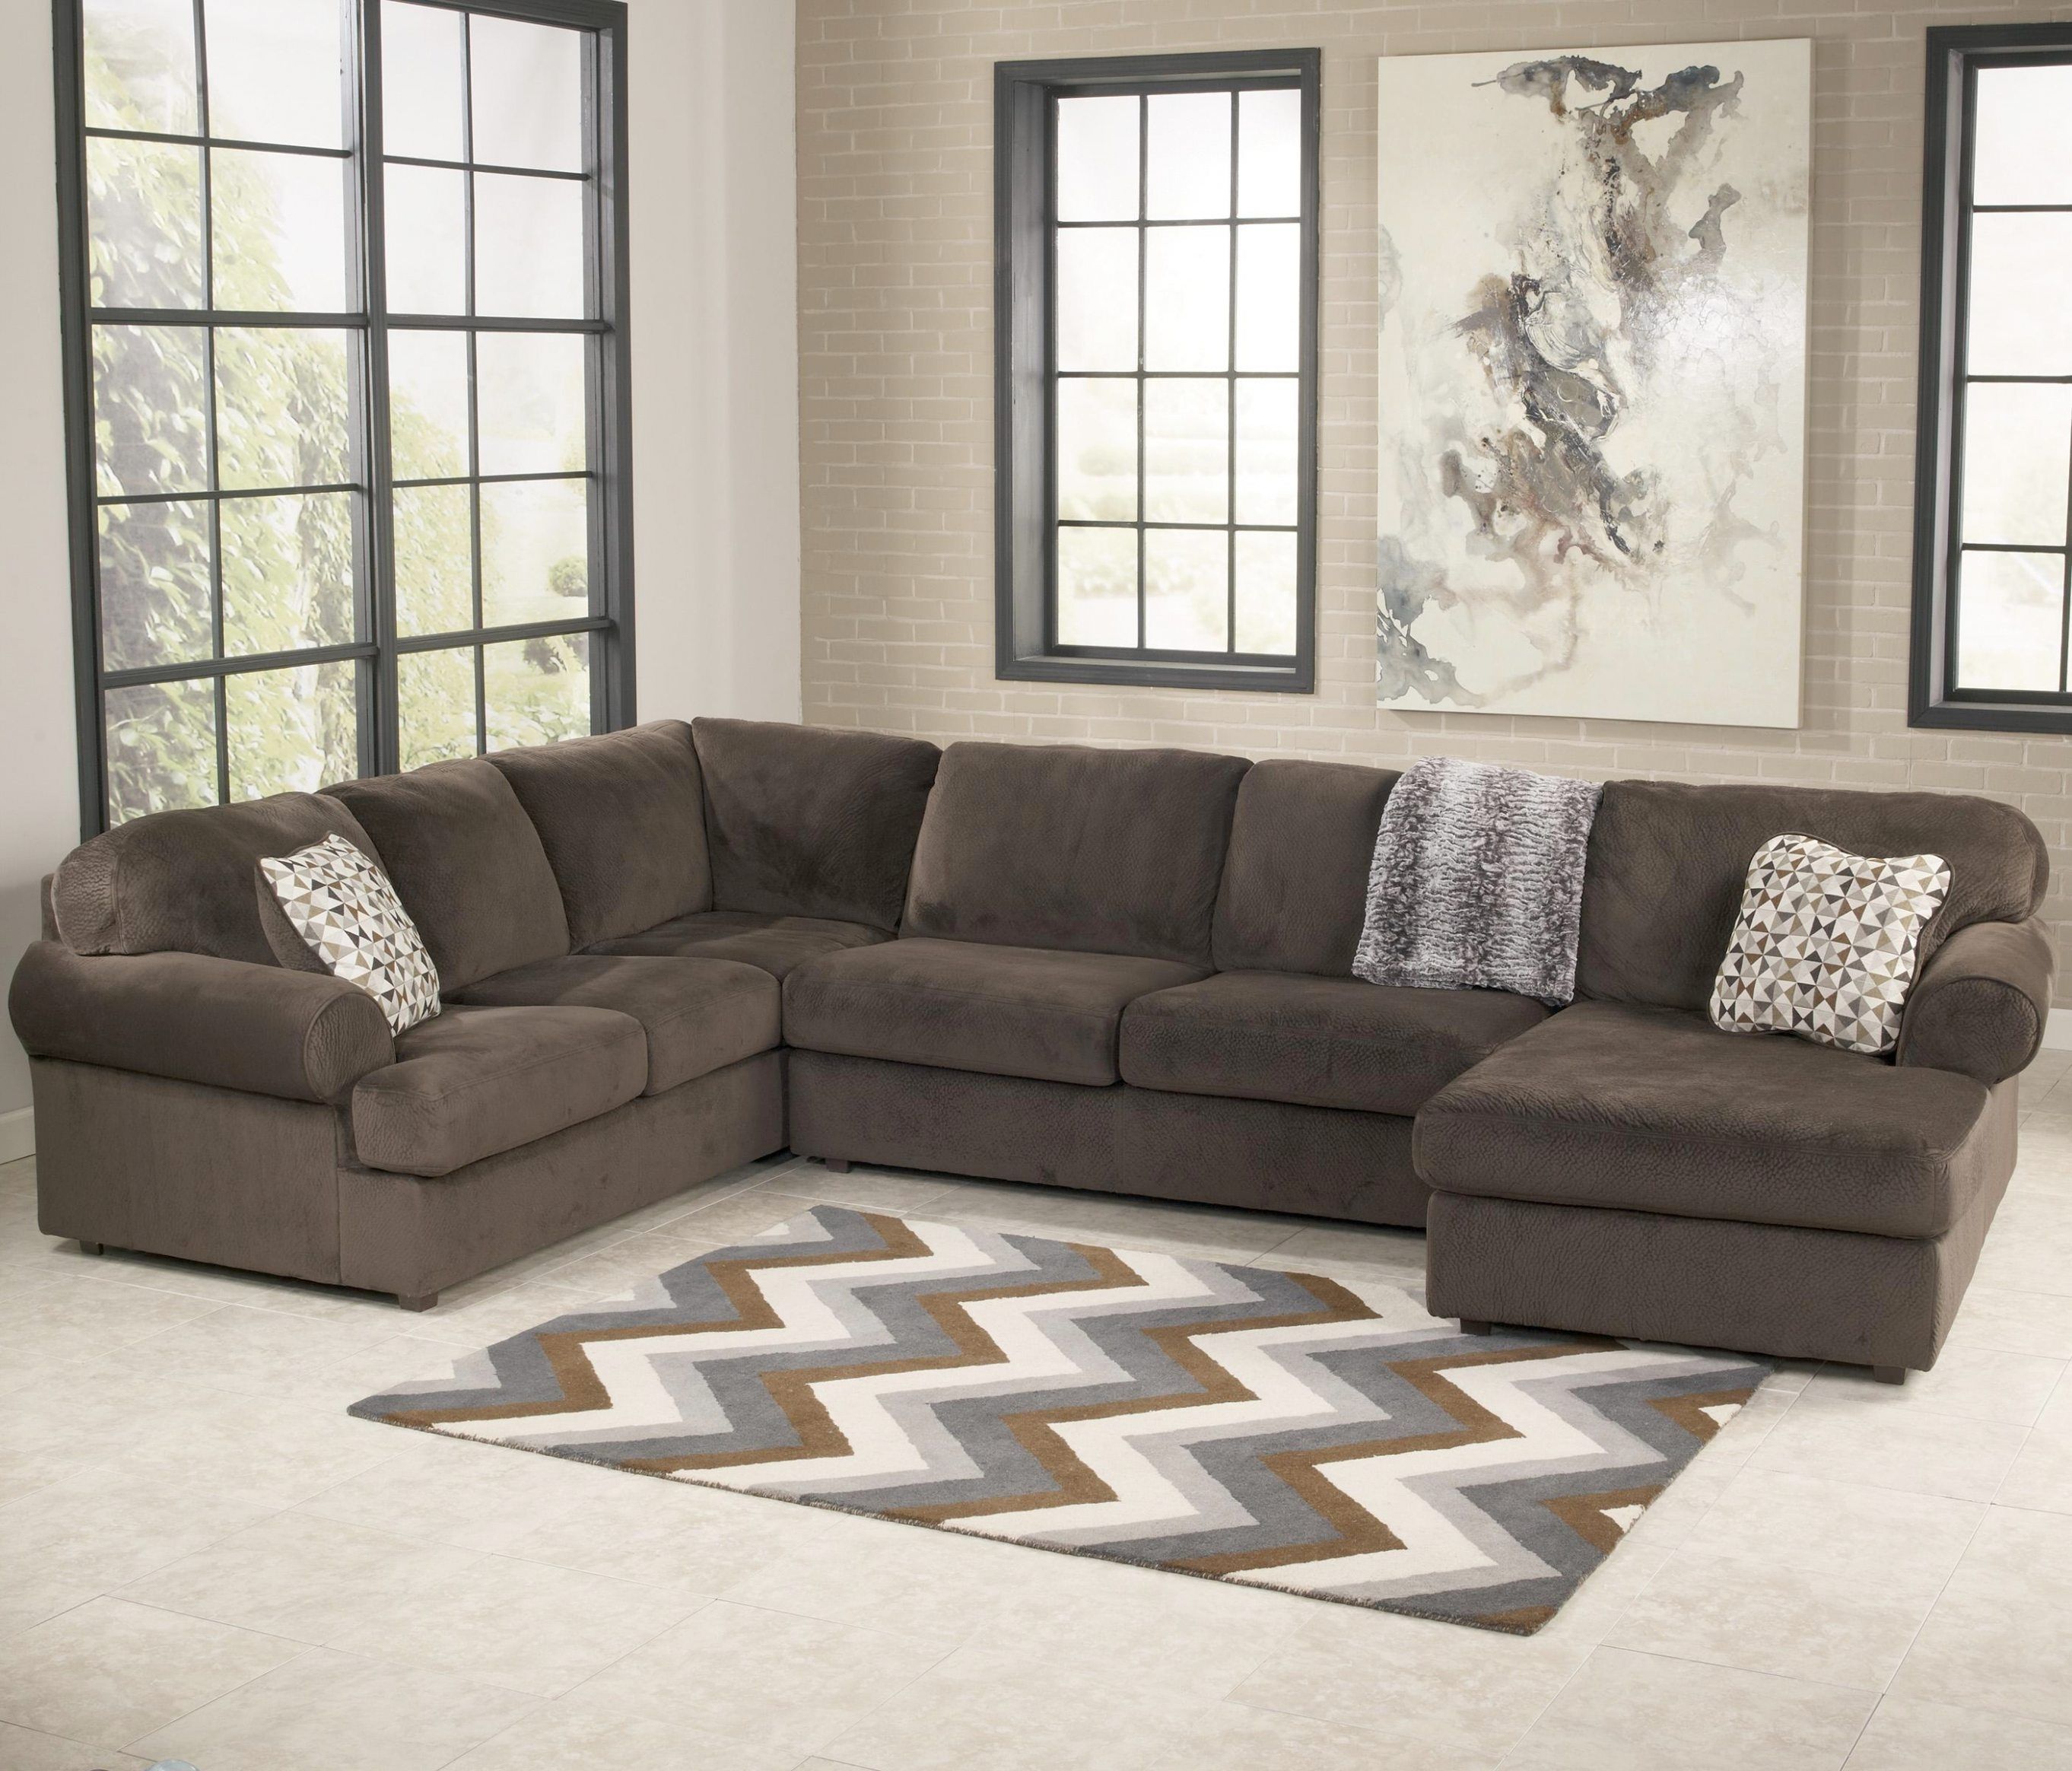 Signature Designashley Jessa Place – Chocolate Sectional Sofa Intended For Green Bay Wi Sectional Sofas (View 3 of 10)